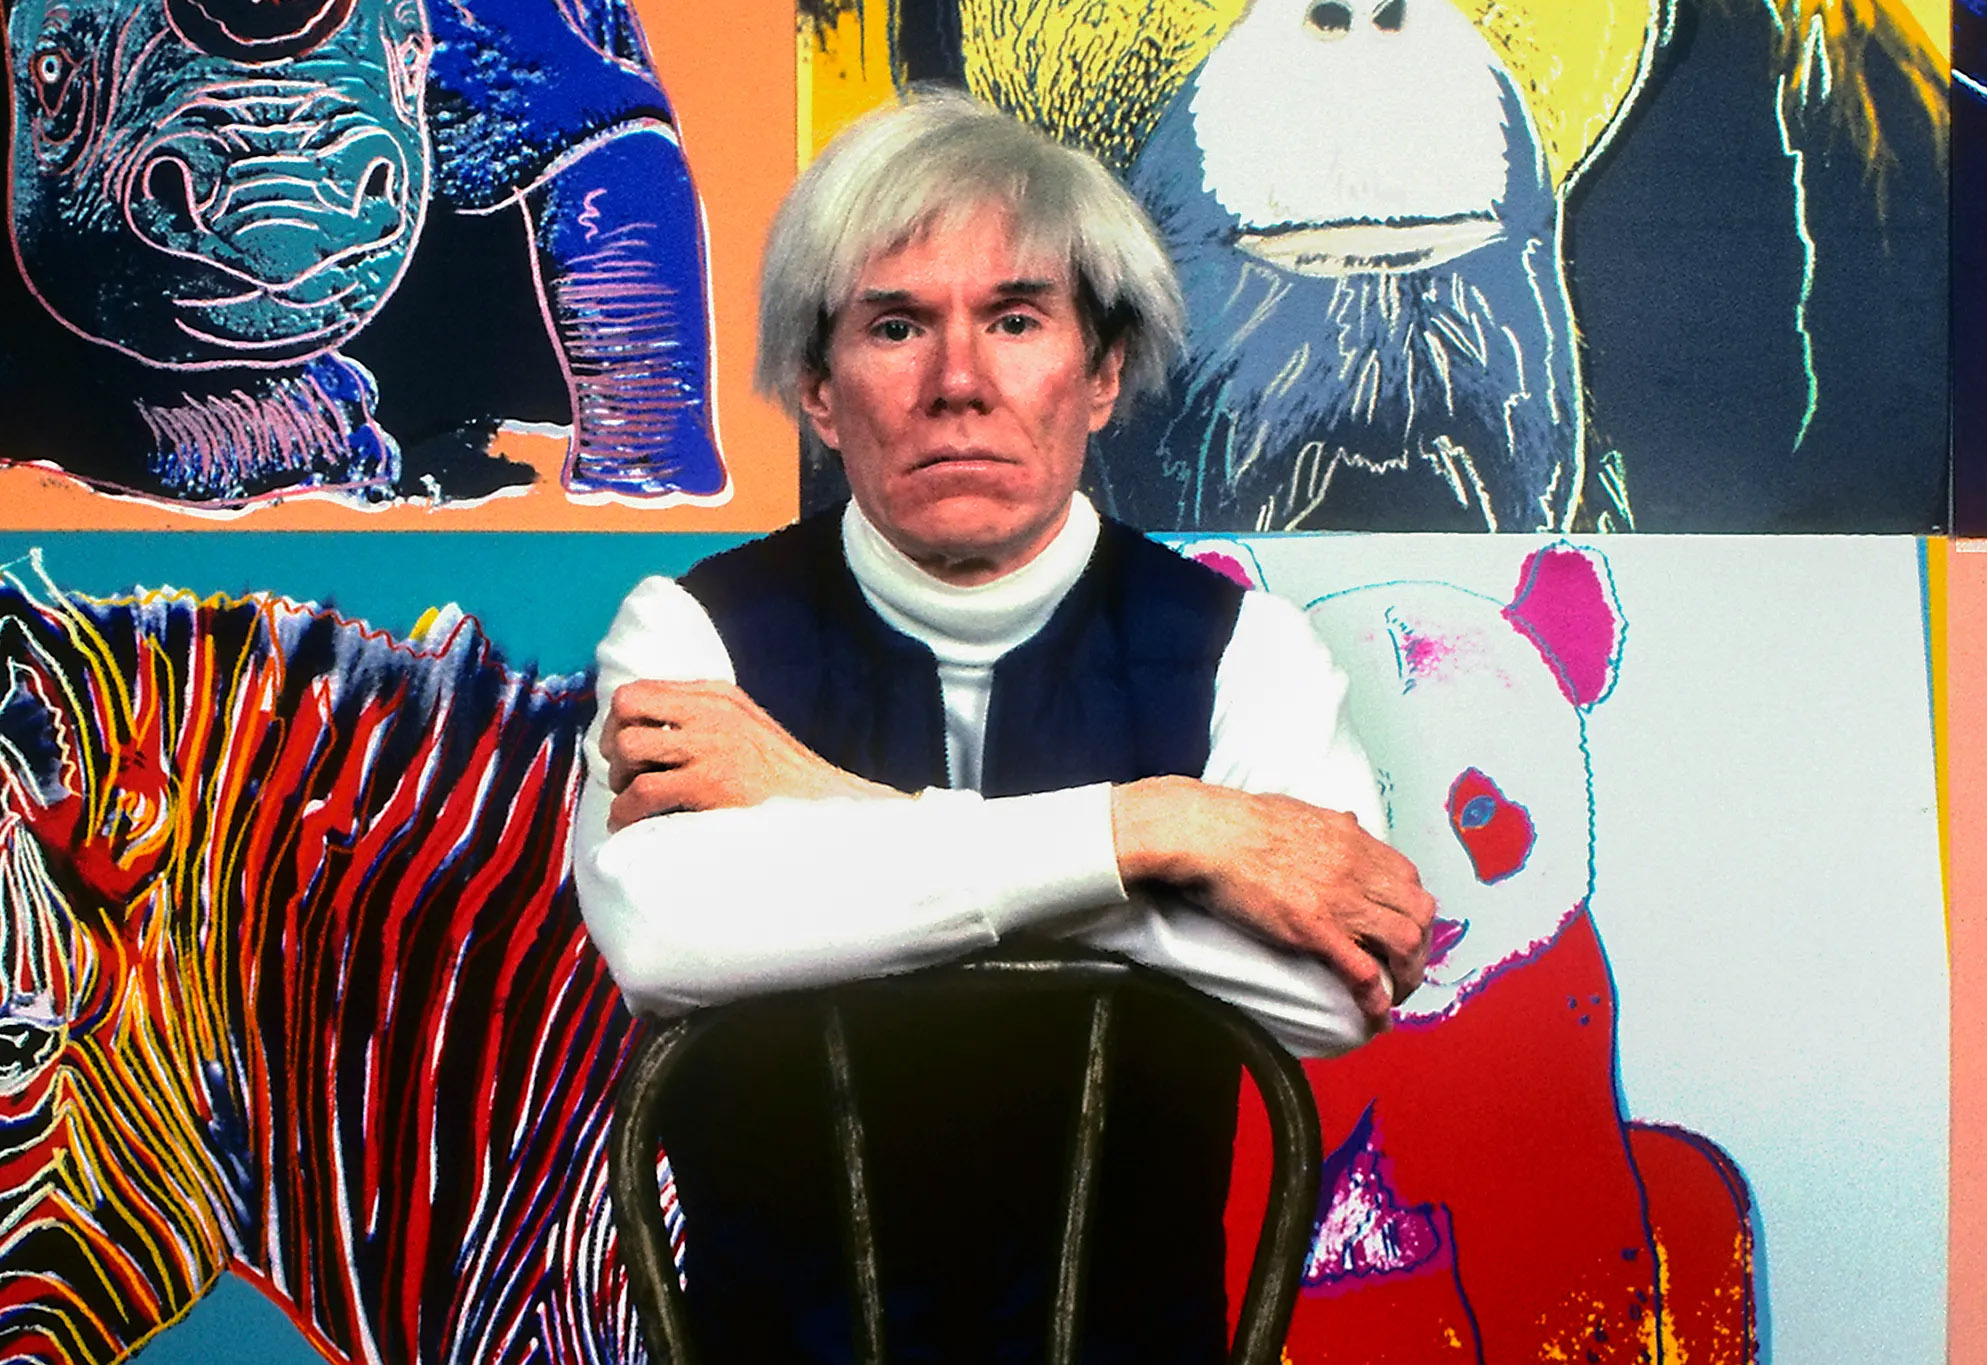 27 interesting facts about Andy Warhol